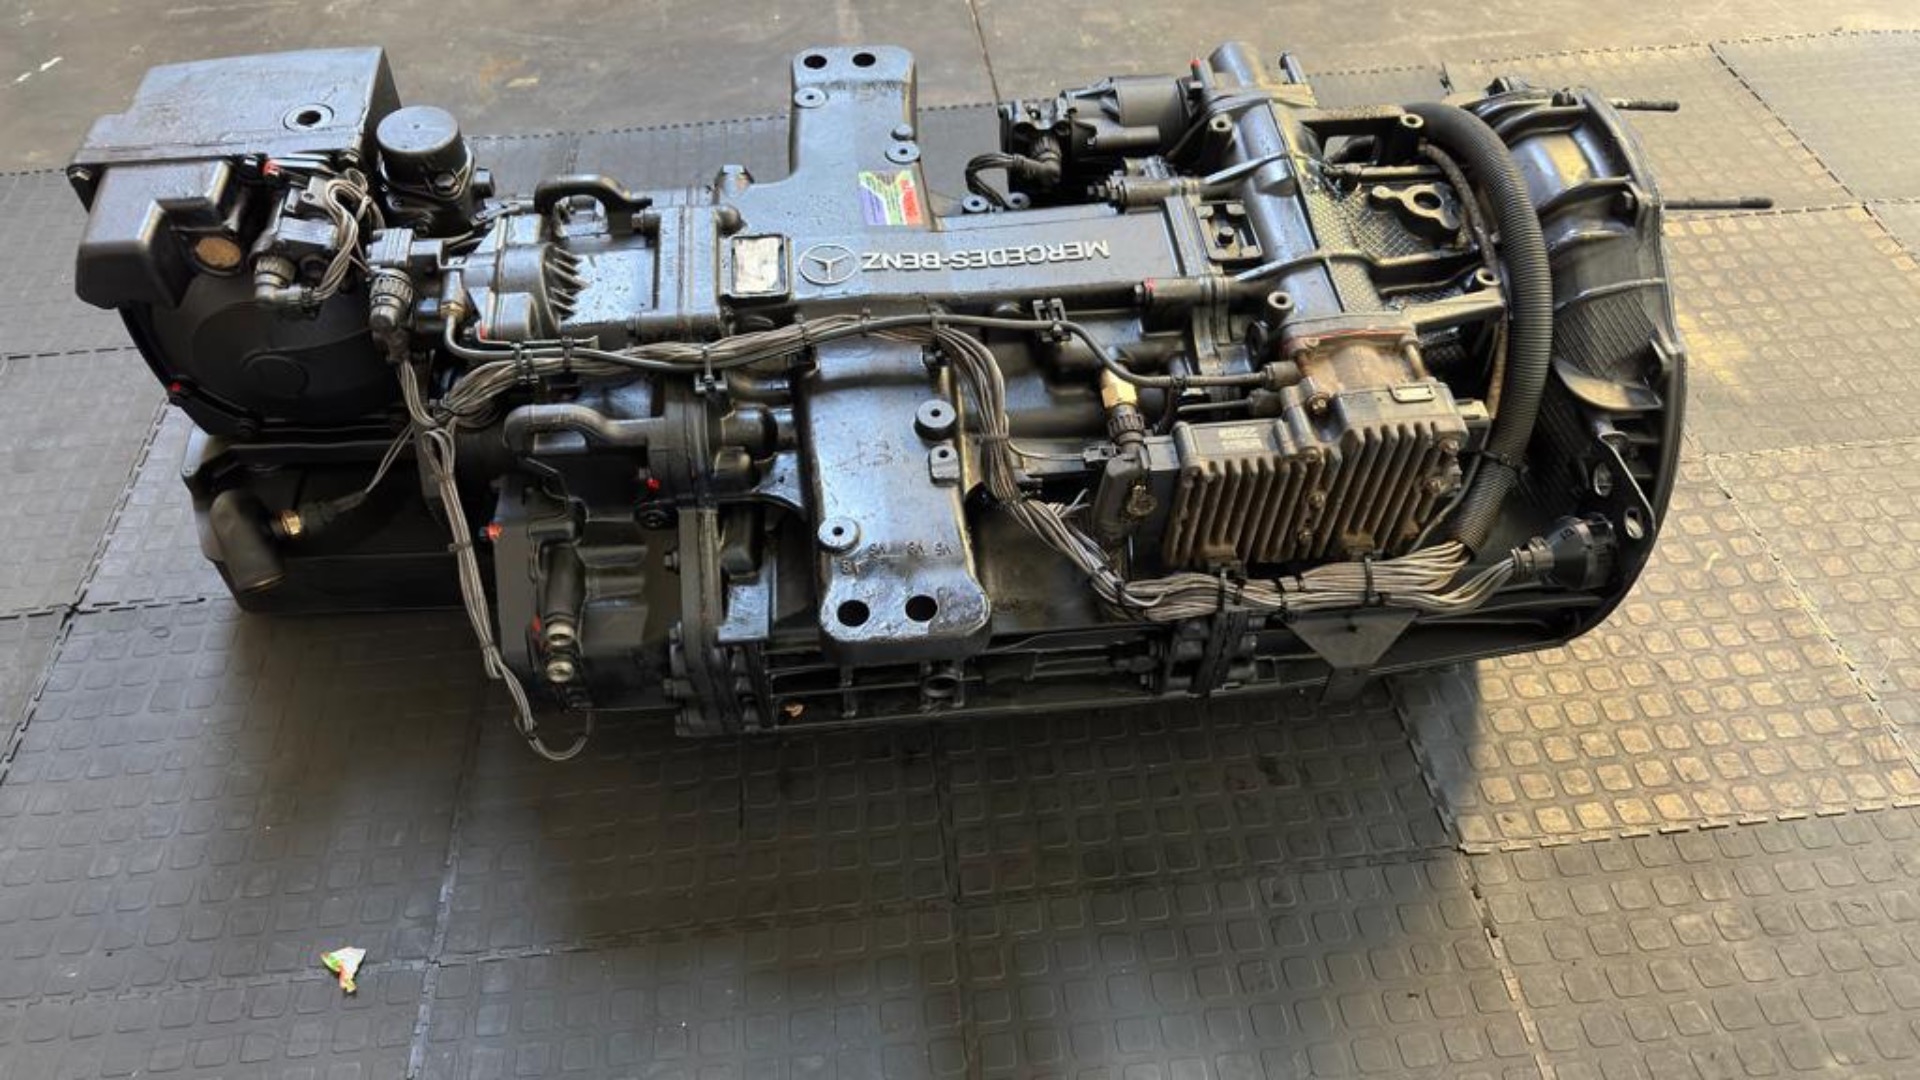 New Brand New Actros G281 Gearbox and MP4 Retarder for sale in Gauteng |  Please Contact